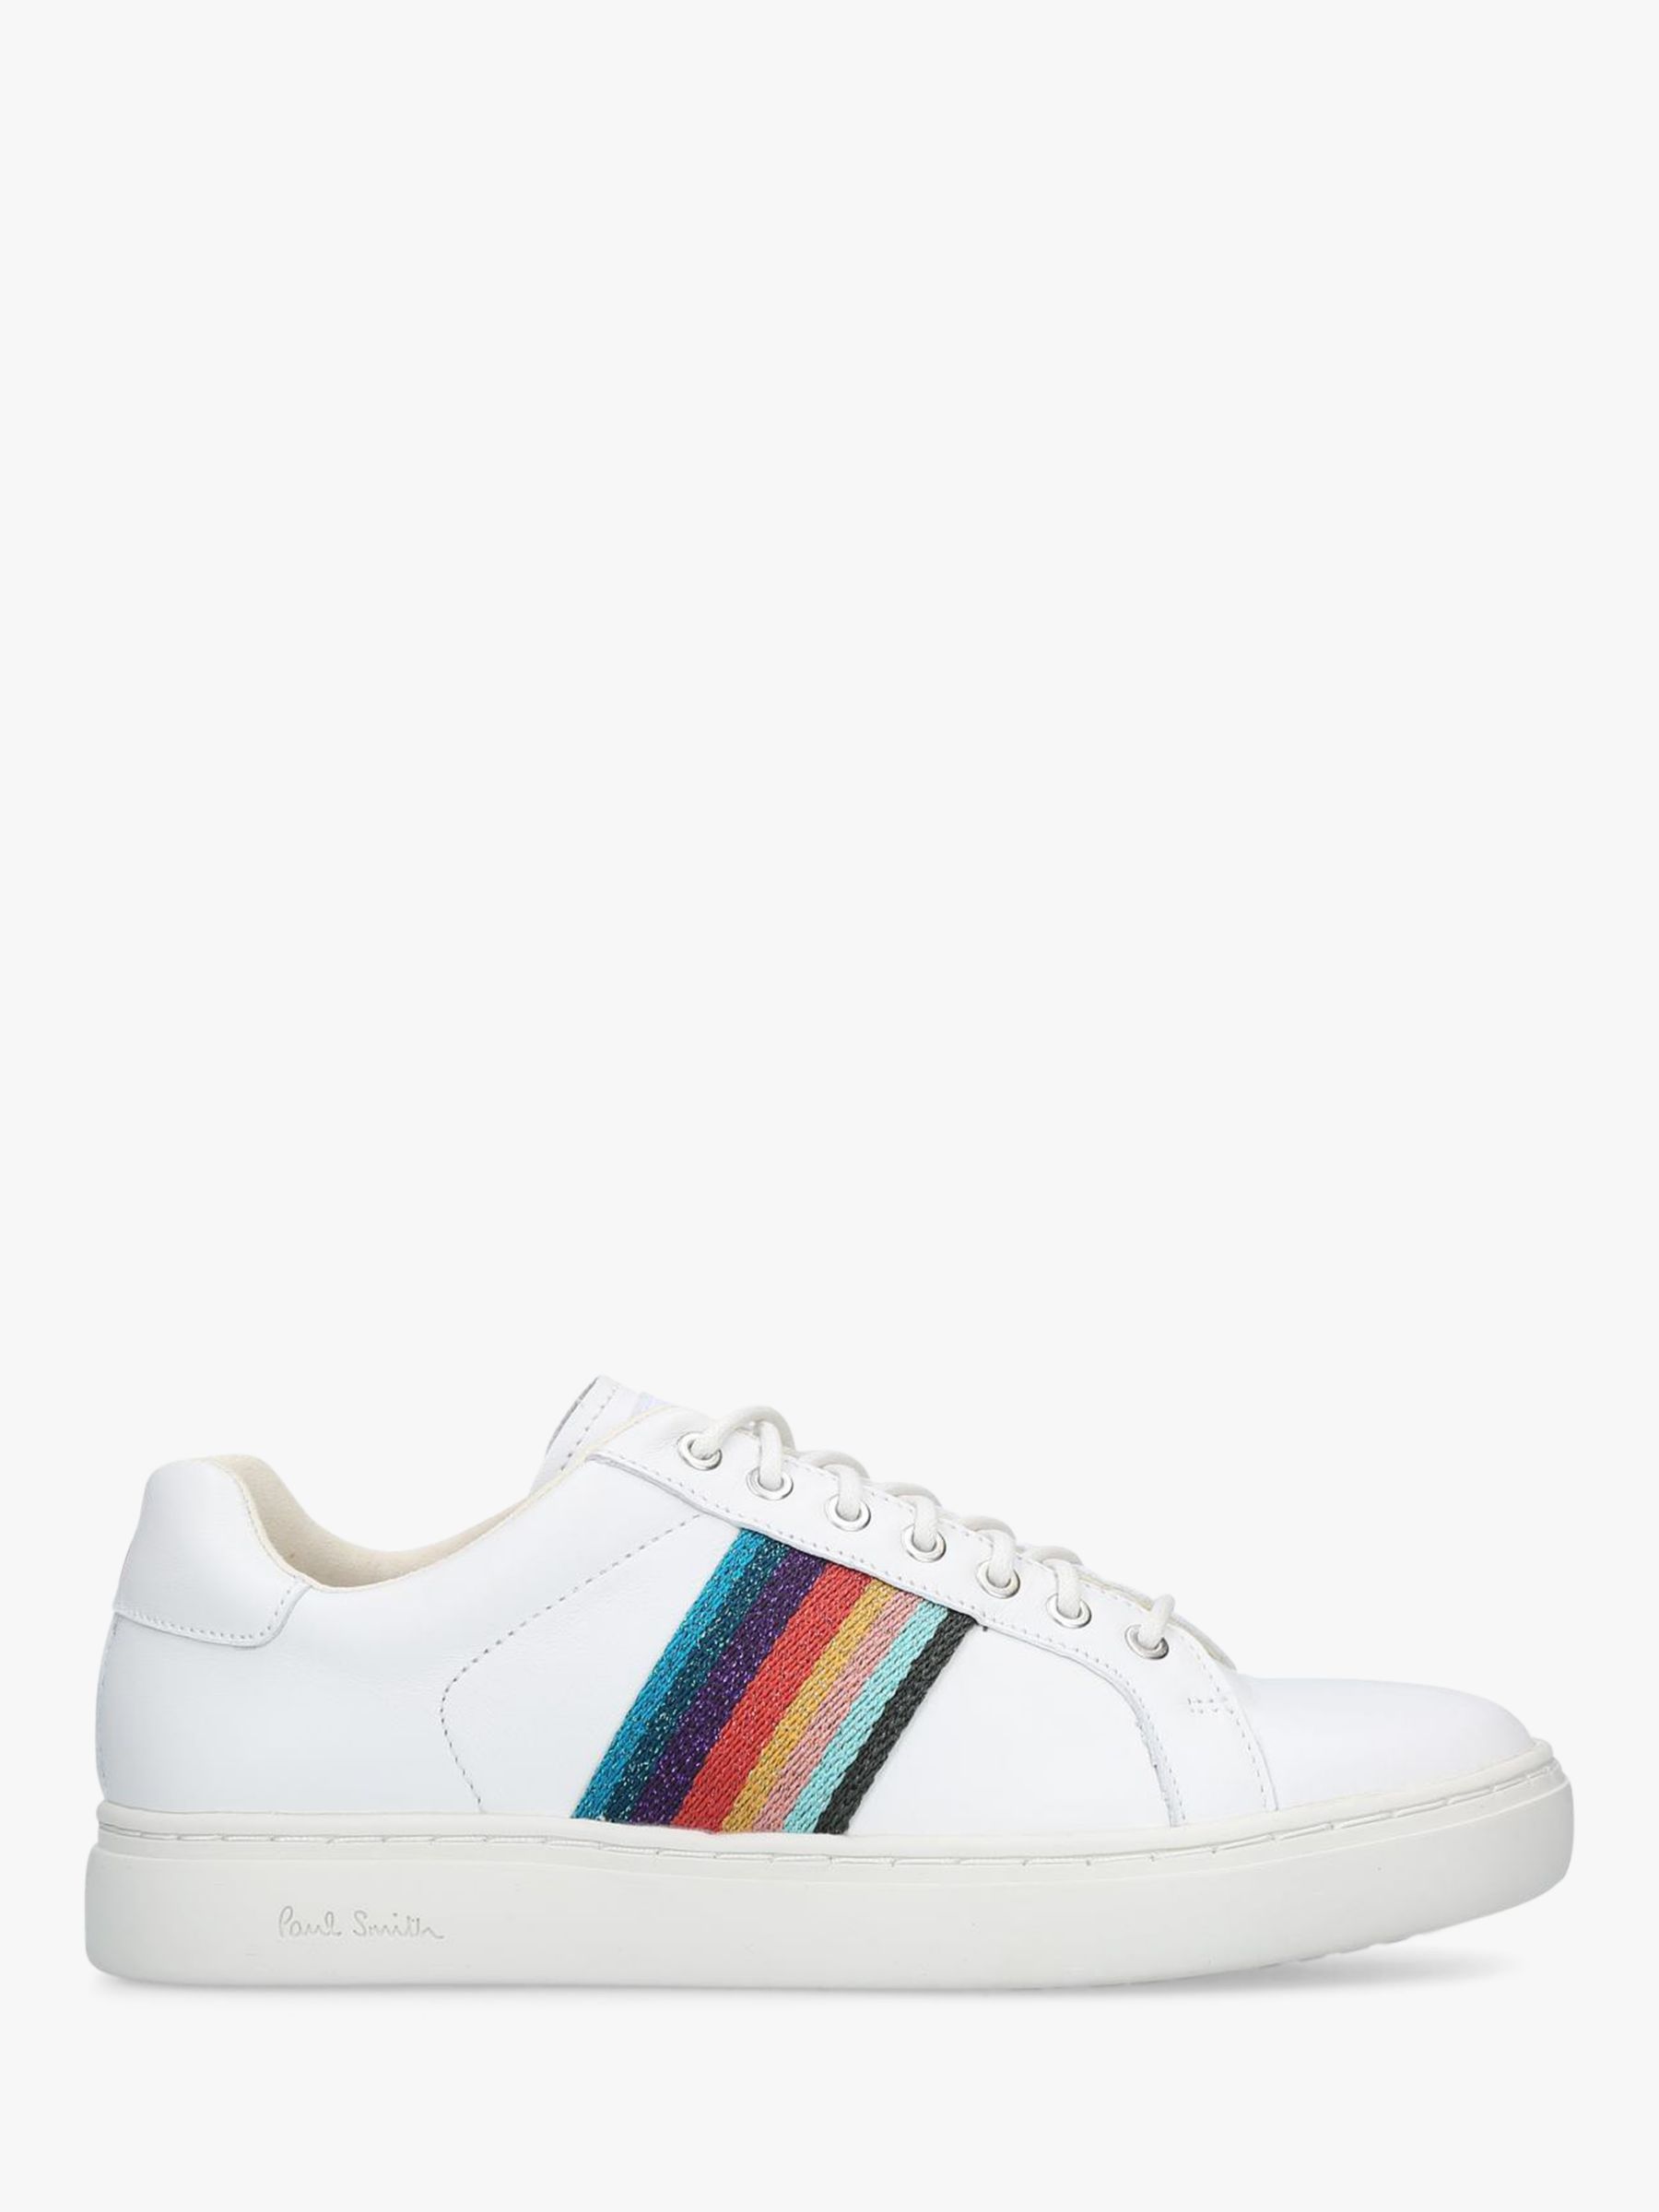 Paul Smith Lapin Stripe Lace Up 